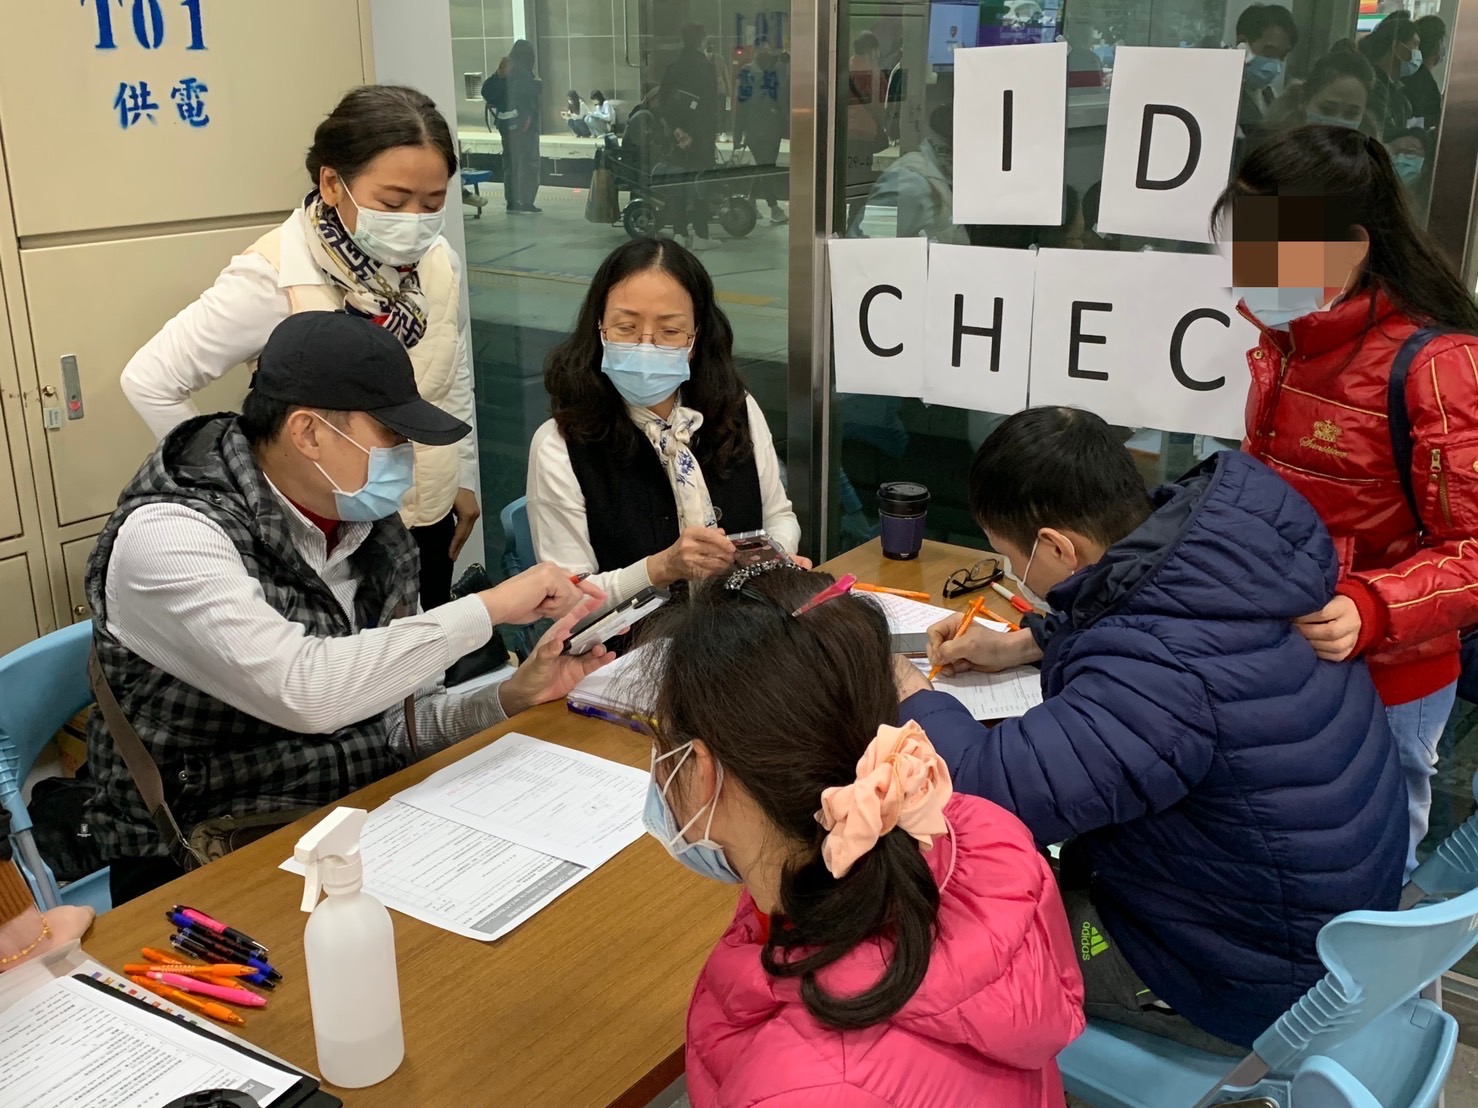 NIA Taoyuan County Service Center & Taoyuan Brigade assist foreign nationals in checking their identities & vaccination procedures. (Photo / Provided by the Taoyuan County Service Center)